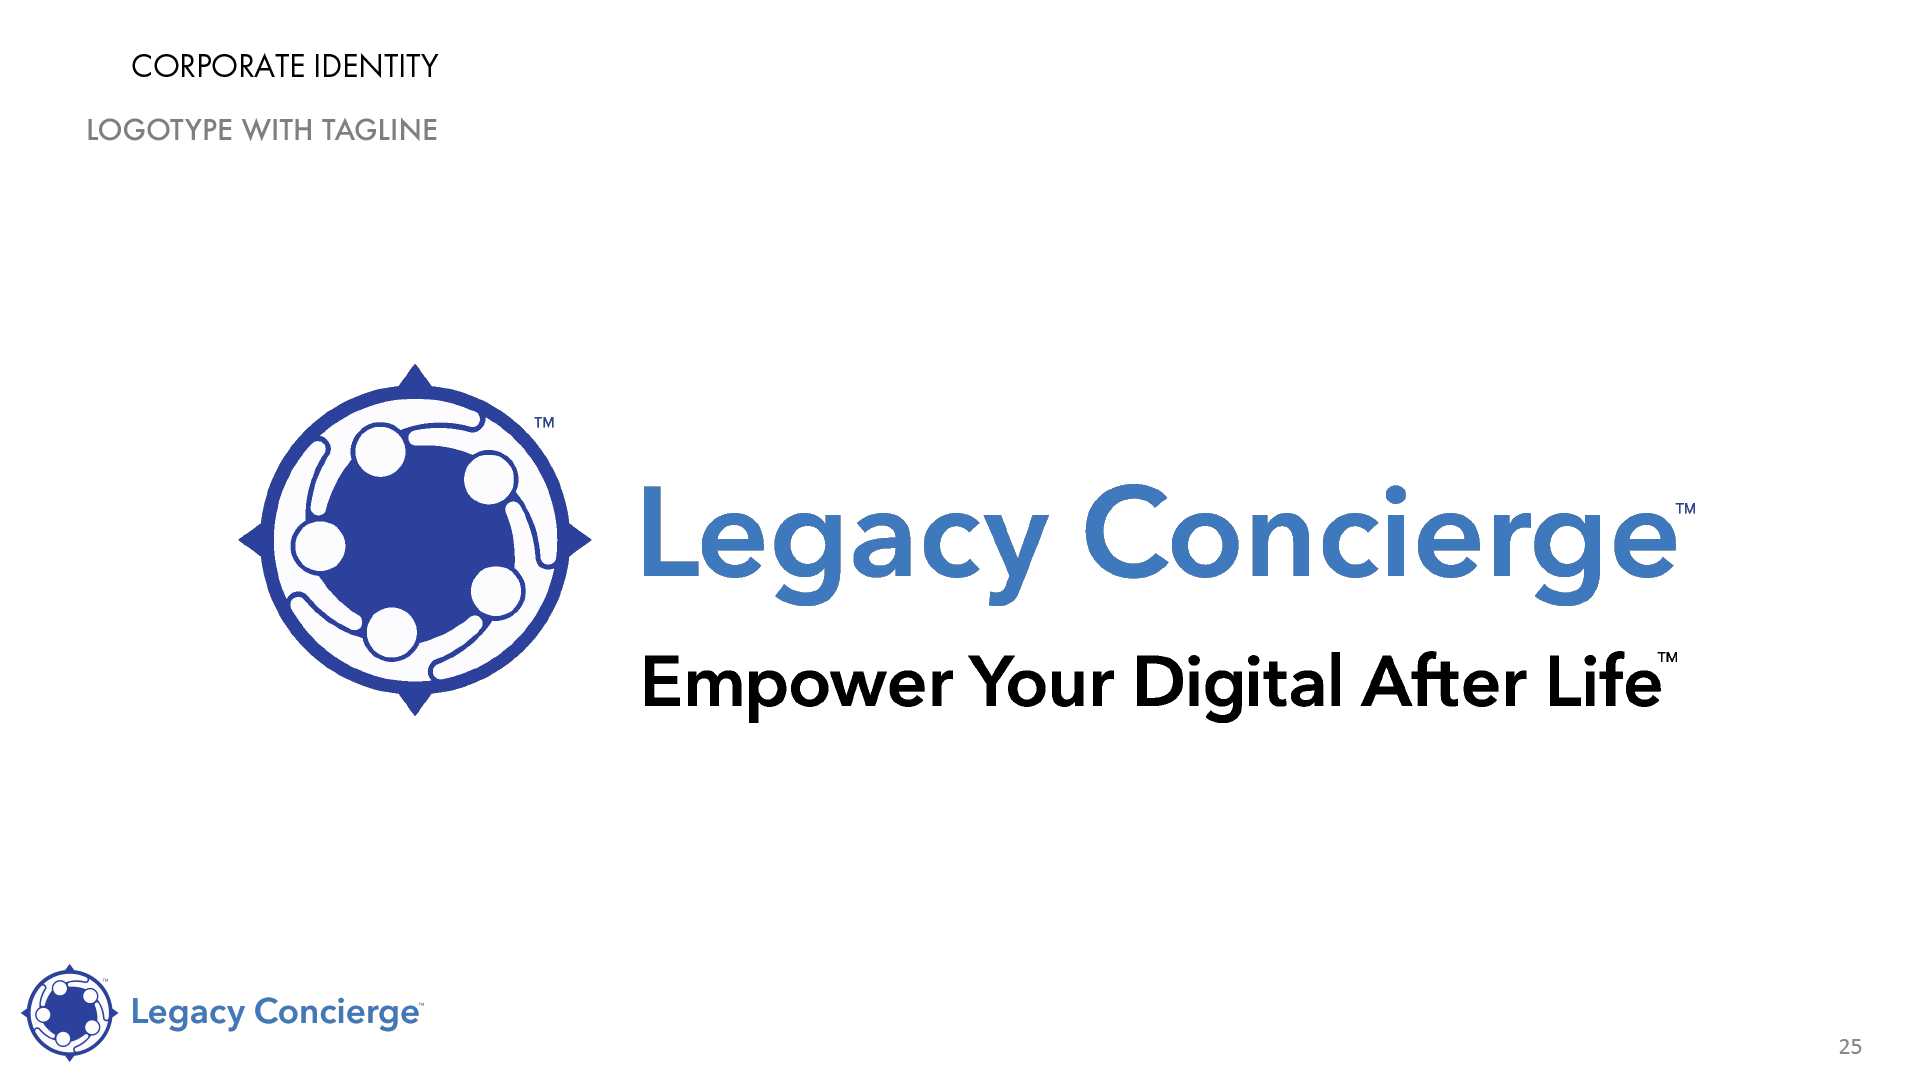 LEGACY_CONCIERGE_STYLEGUIDE-25.png